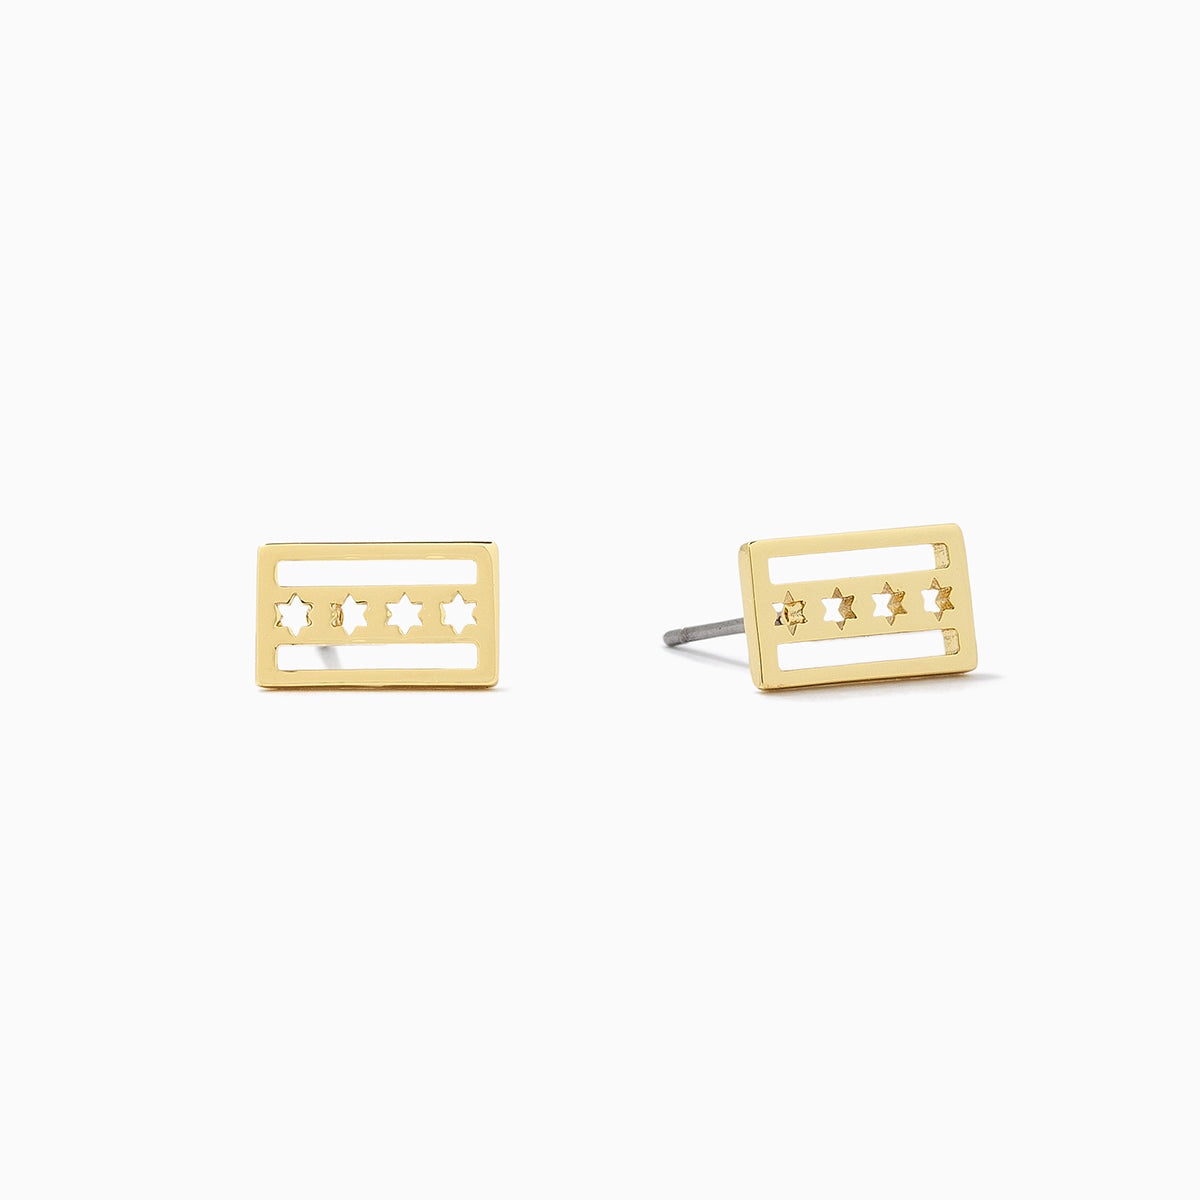 Chicago Flag Stud Earrings | Gold | Product Image | Uncommon James